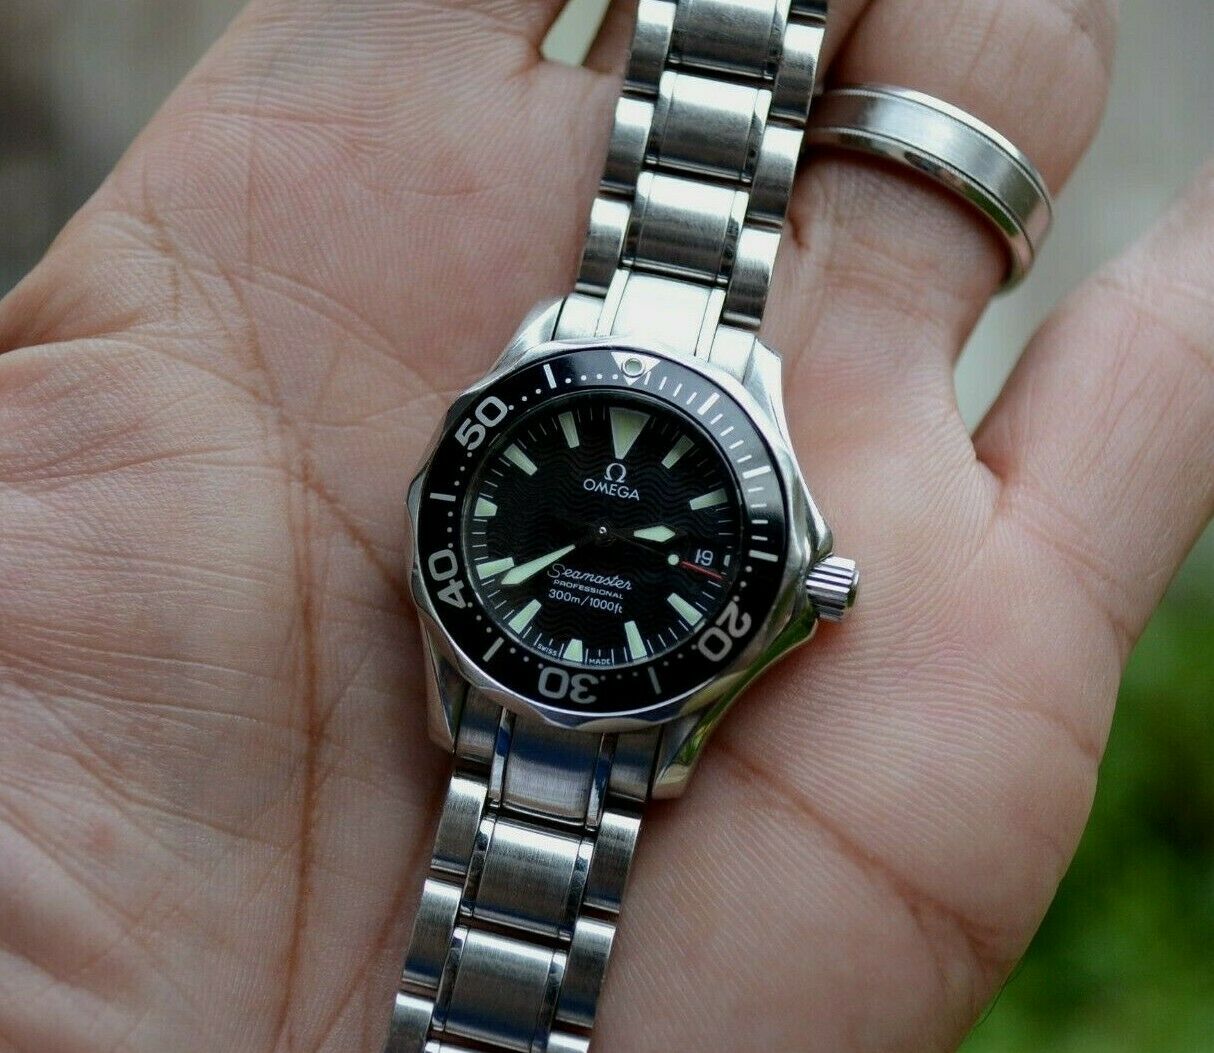 Omega Seamaster 300M Professional 2284.50.00 Stainless Steel